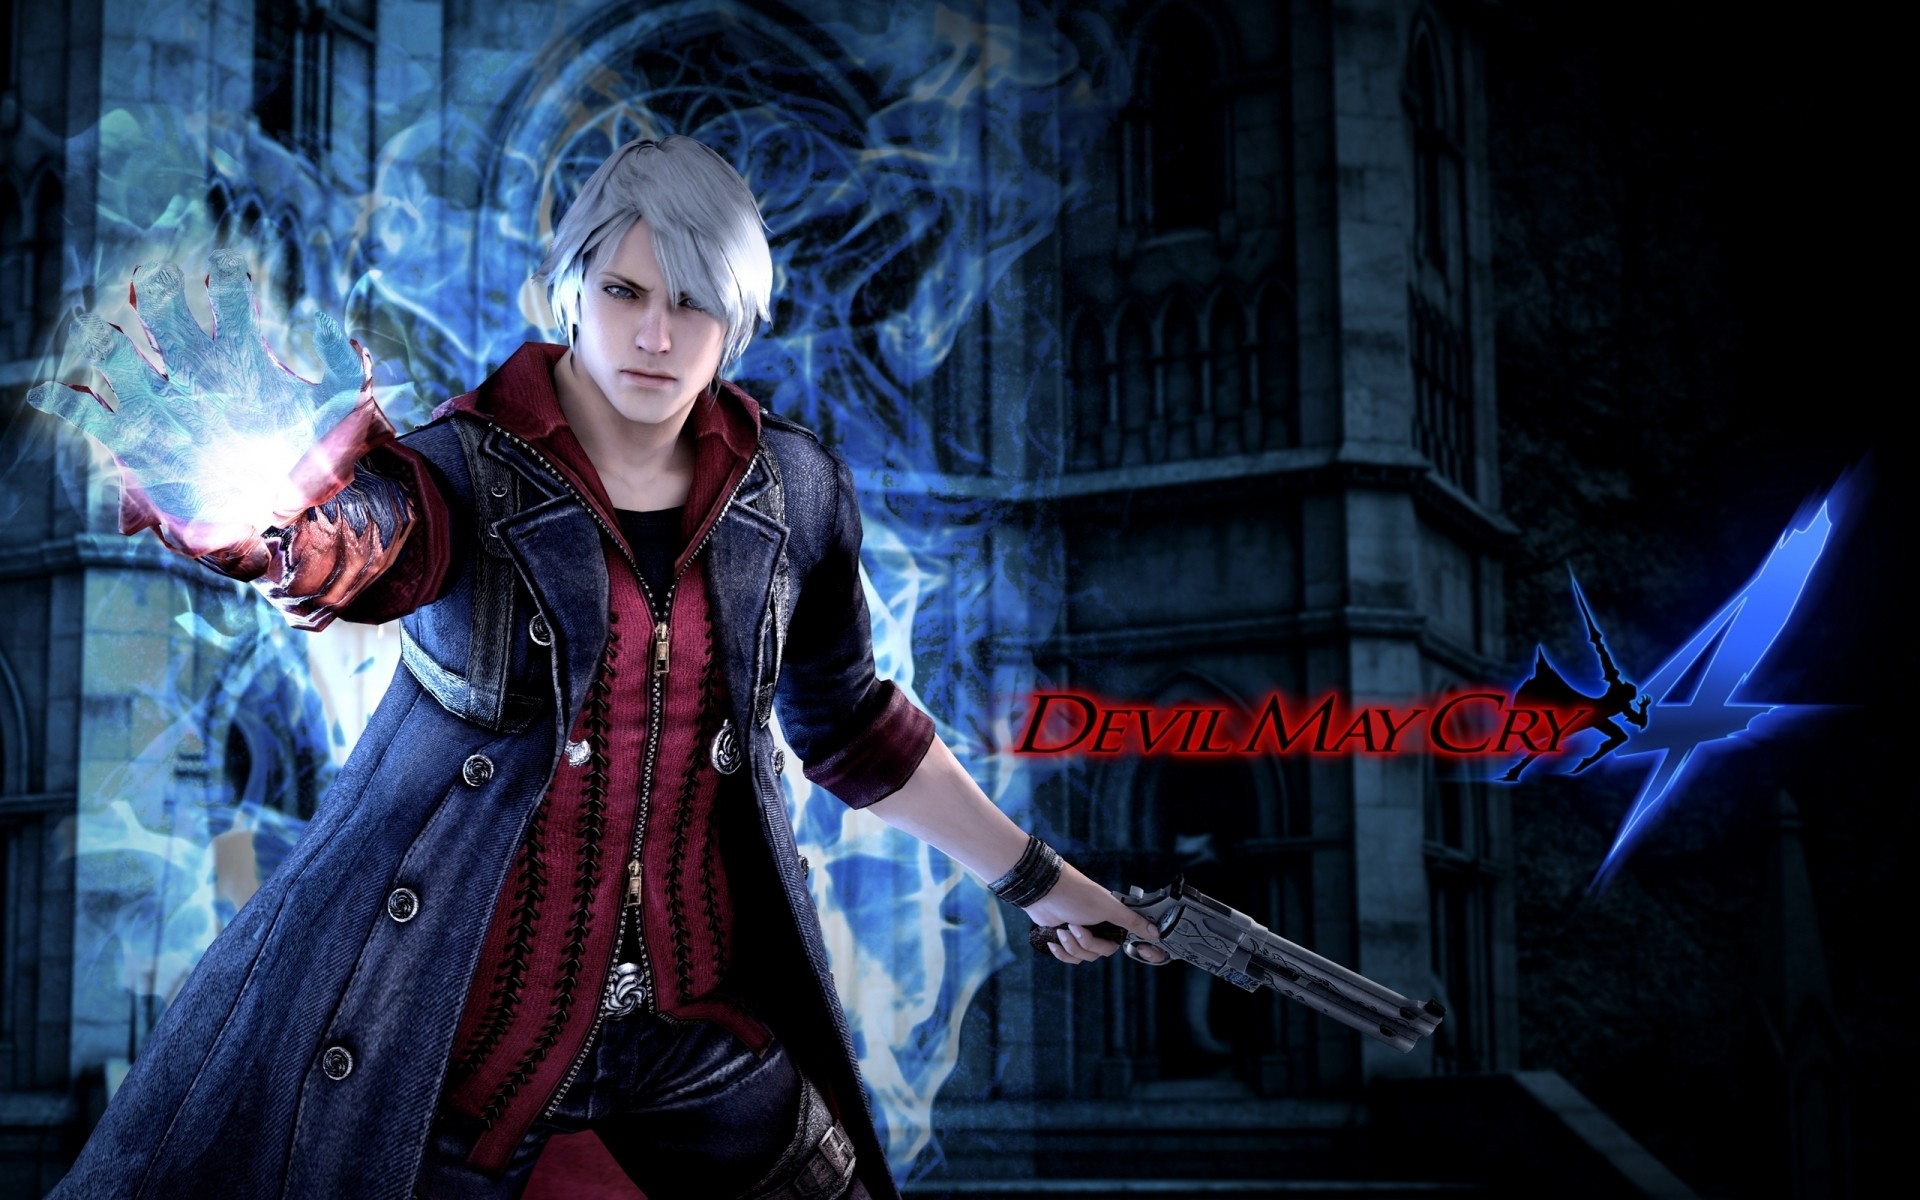 other games music performance musician concert festival singer dark devil may cry